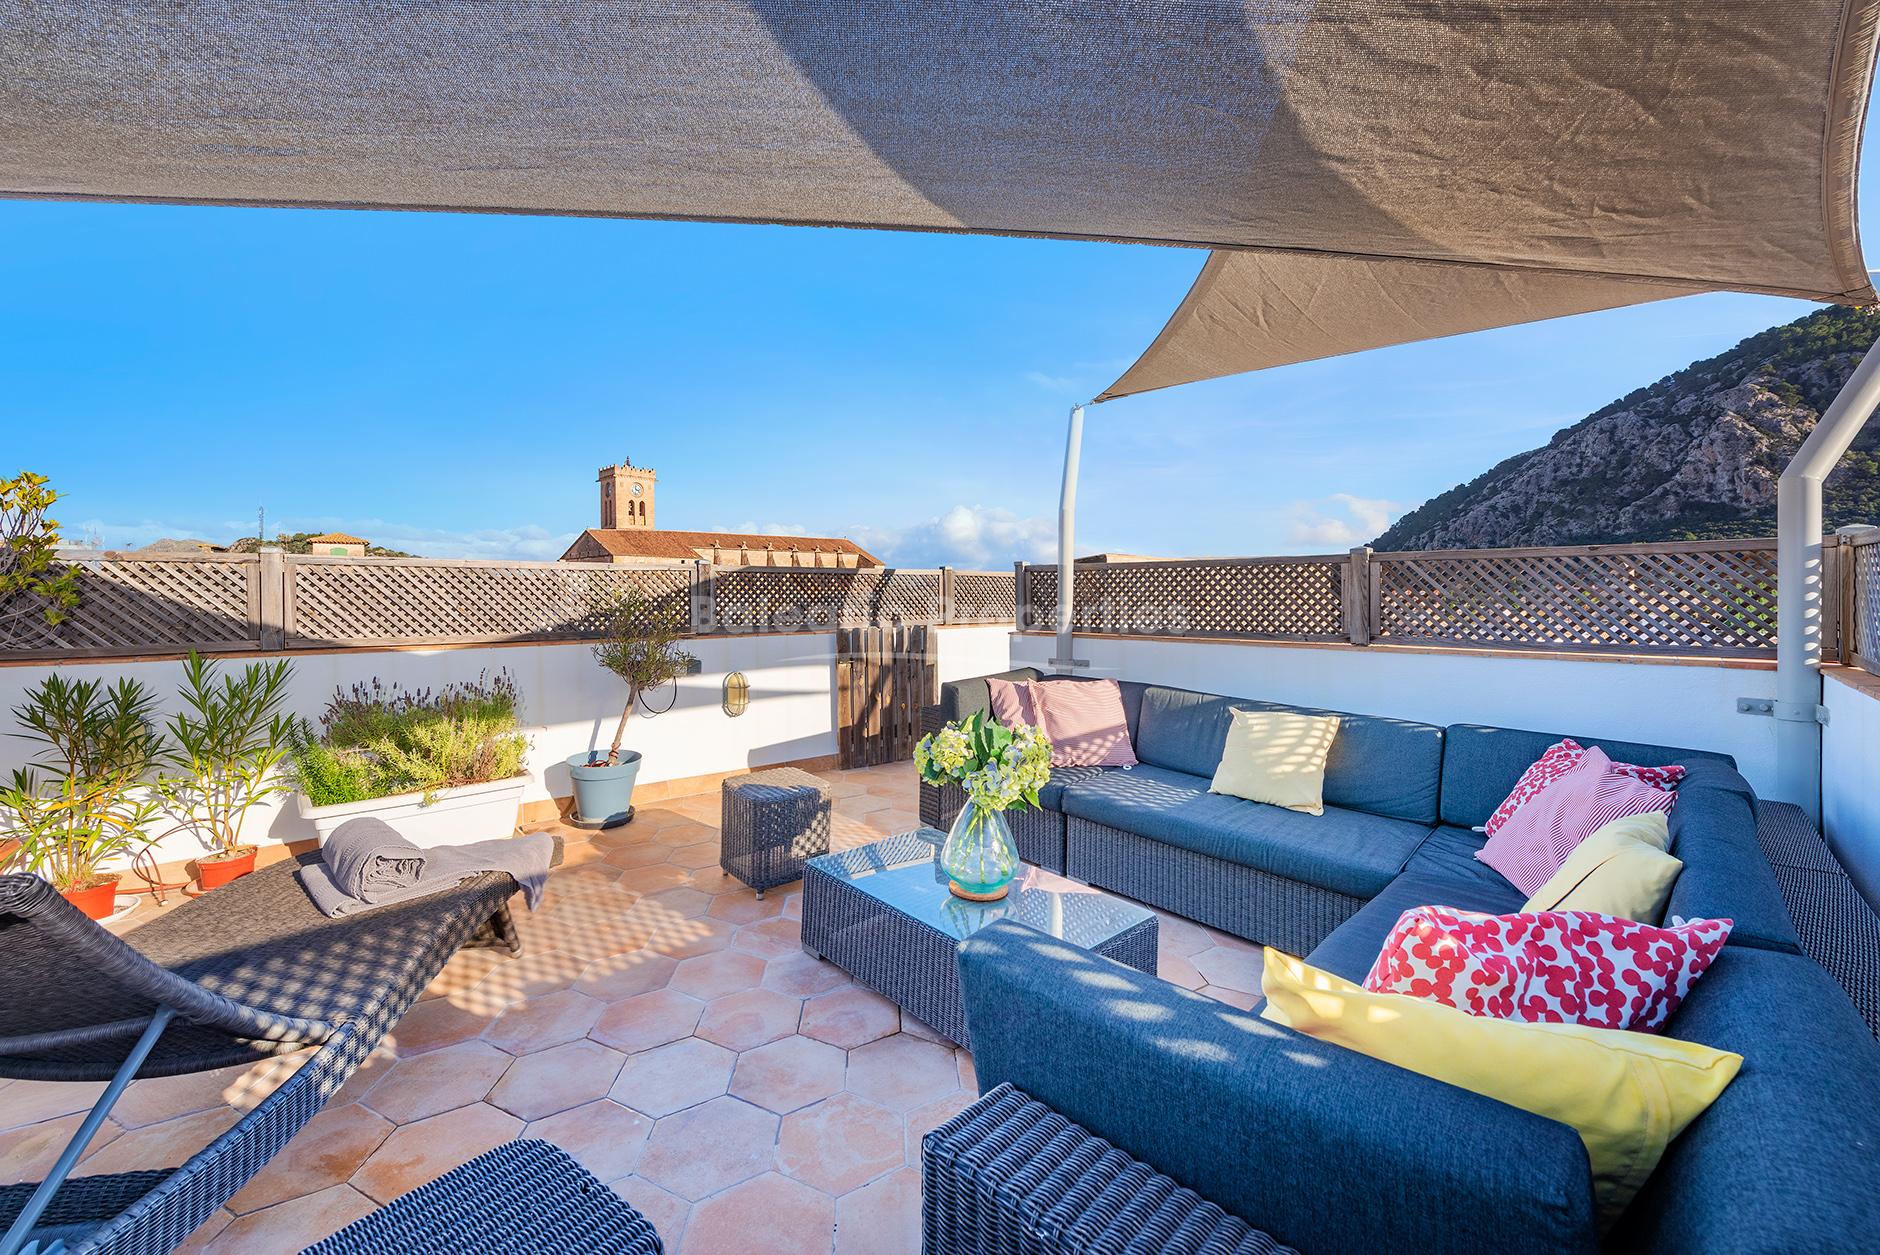 Beautifully decorated town house with holiday rental license for sale in Pollensa, Mallorca